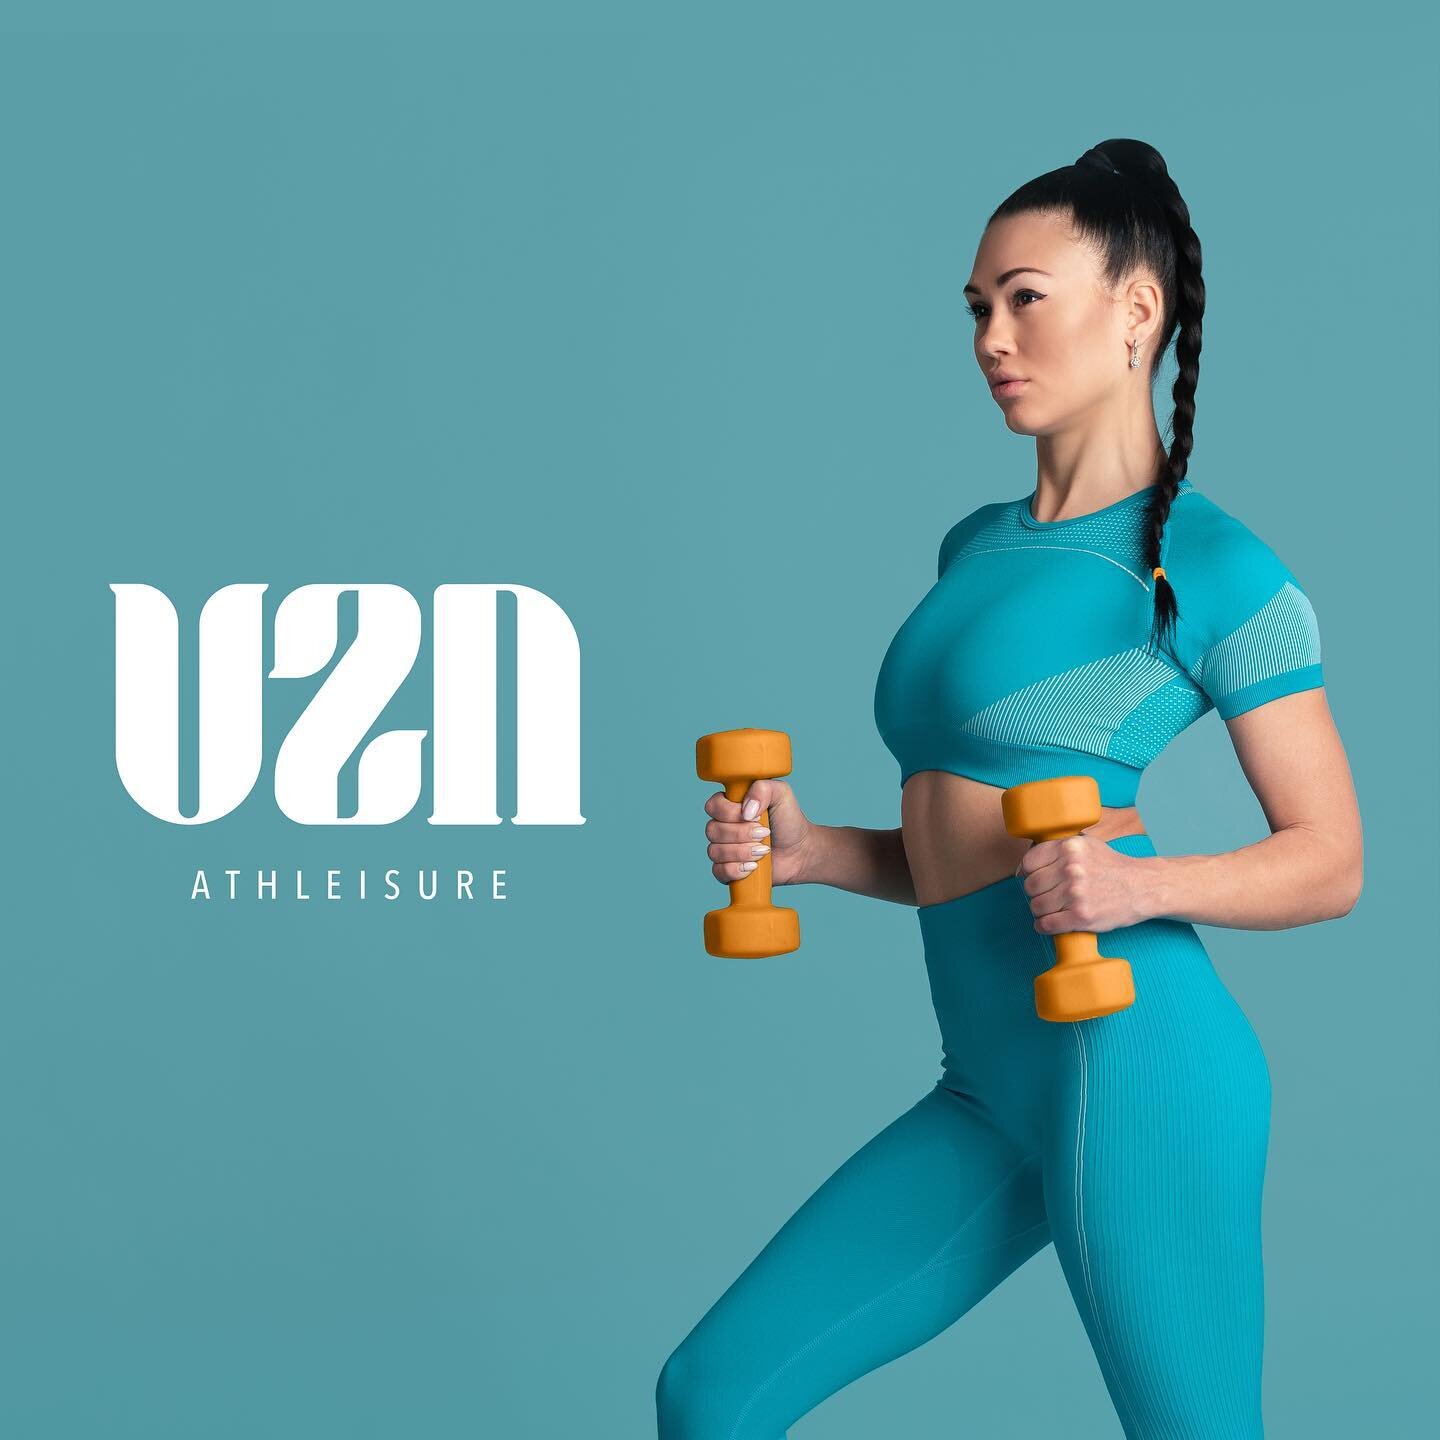 See the VISION. Be the VISION | Brand Design for VZN Athleisure 

#HartGraphicDesign #HGD #HoustonGraphicDesigner #Branding #Fitness #athleisure #GraphicDesigner #HealthandFitness #Activewear